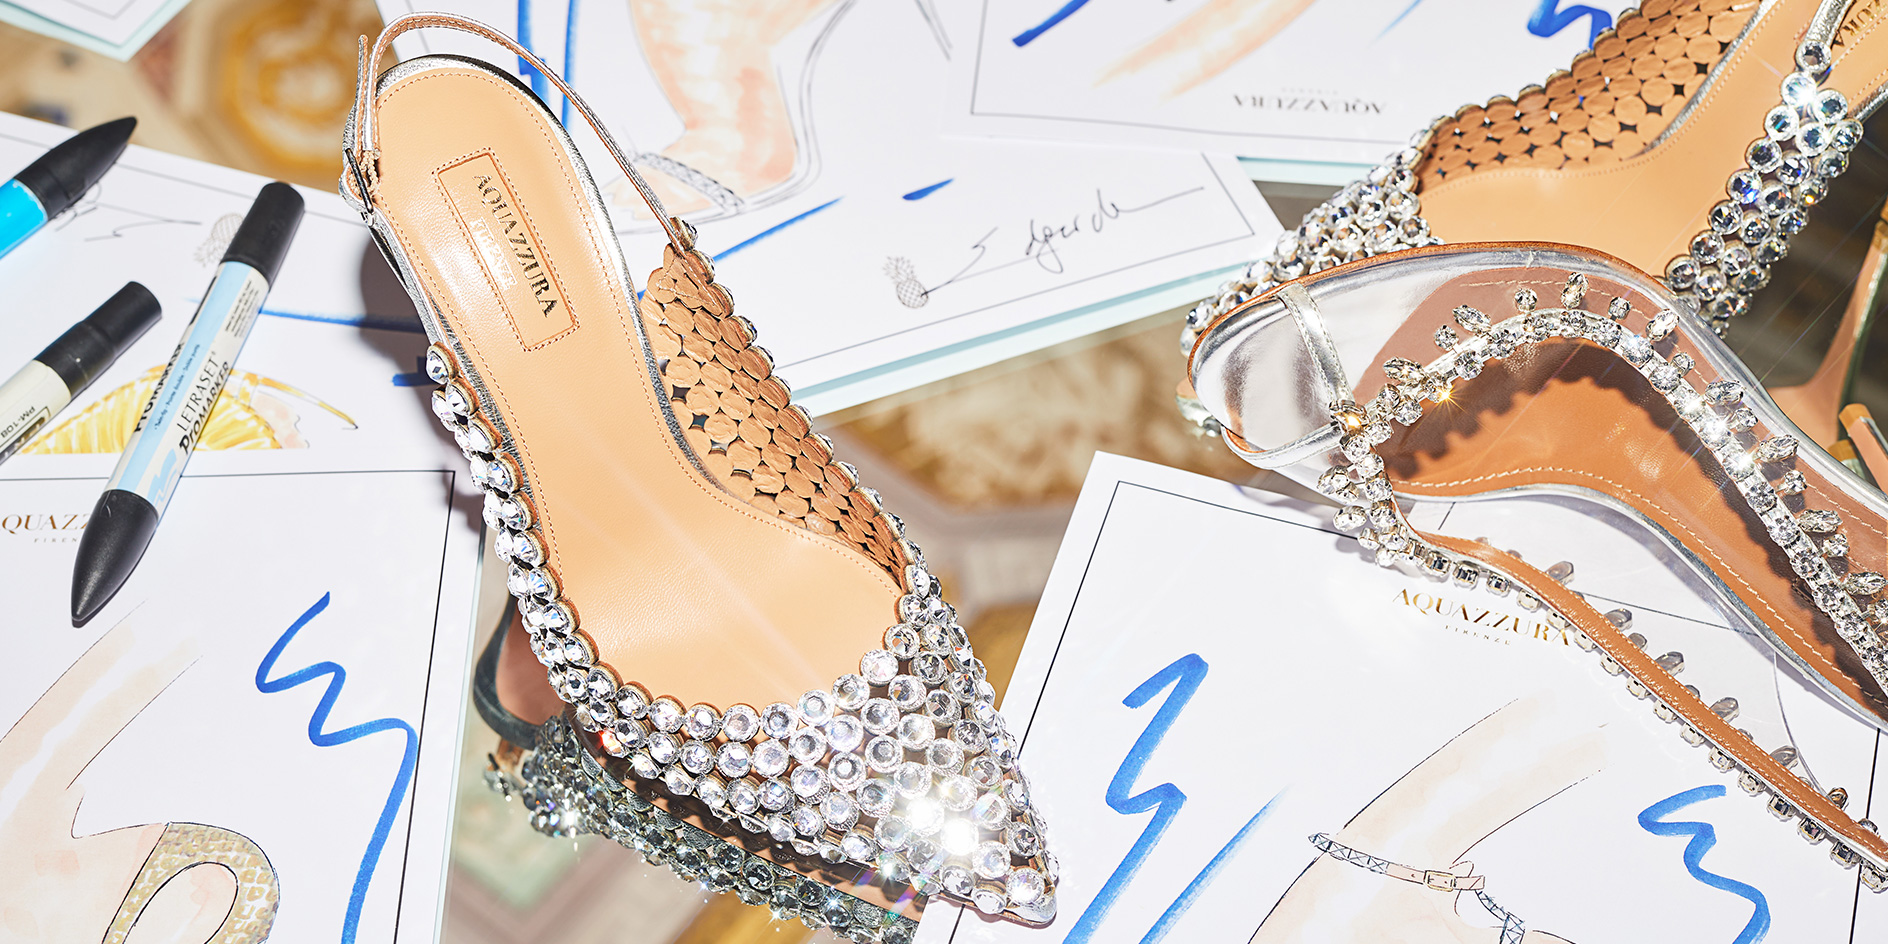 Aquazzura uses social media for their marketing strategy and has worked with high-profile celebrities to help grow their brand